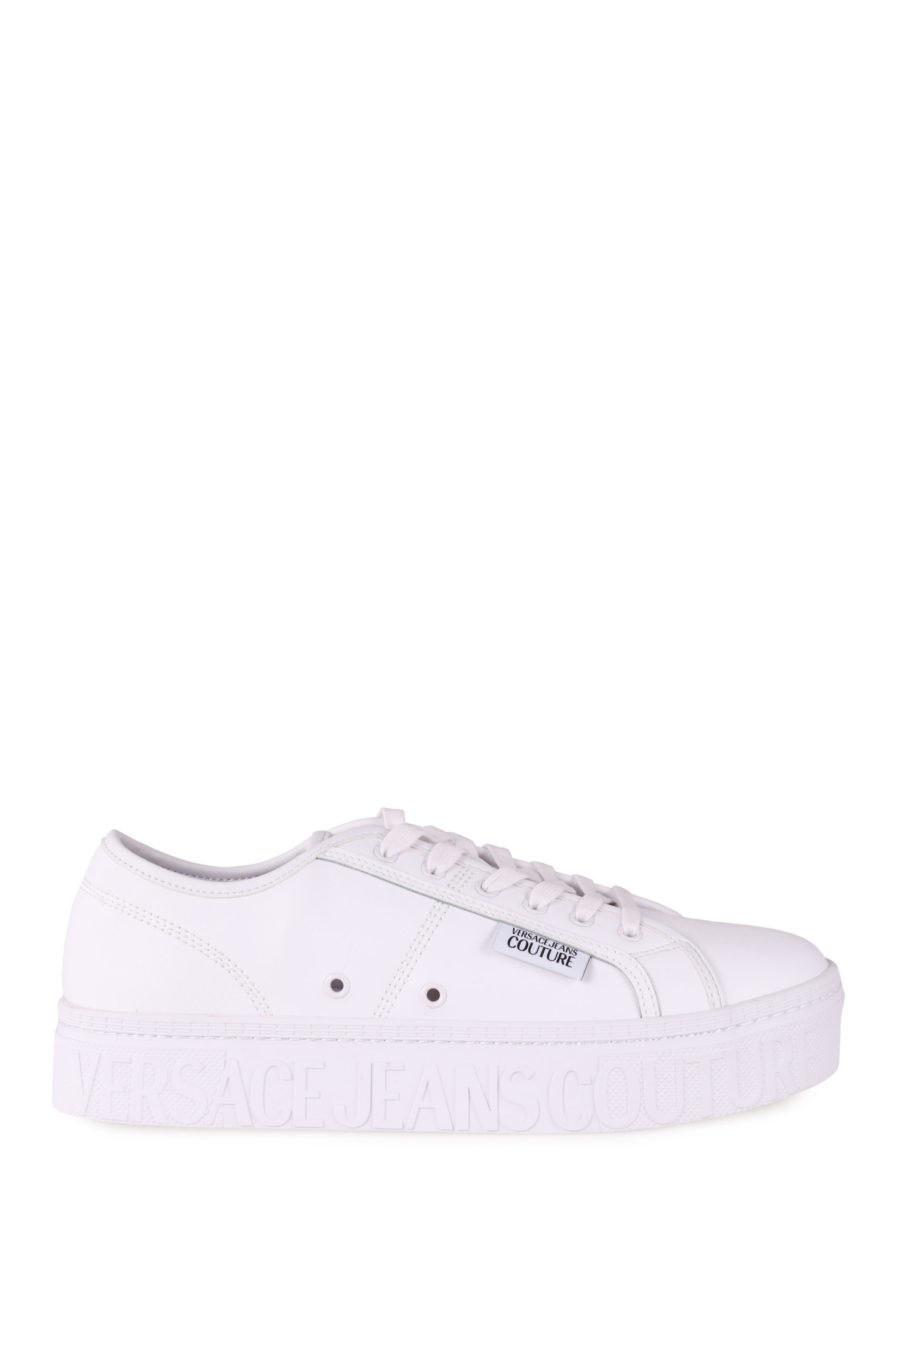 Zapatillas Versace Jeans Couture blancas con suela con logotipo - (Duplicate Imported from WooCommerce) - IMG 0439 scaled